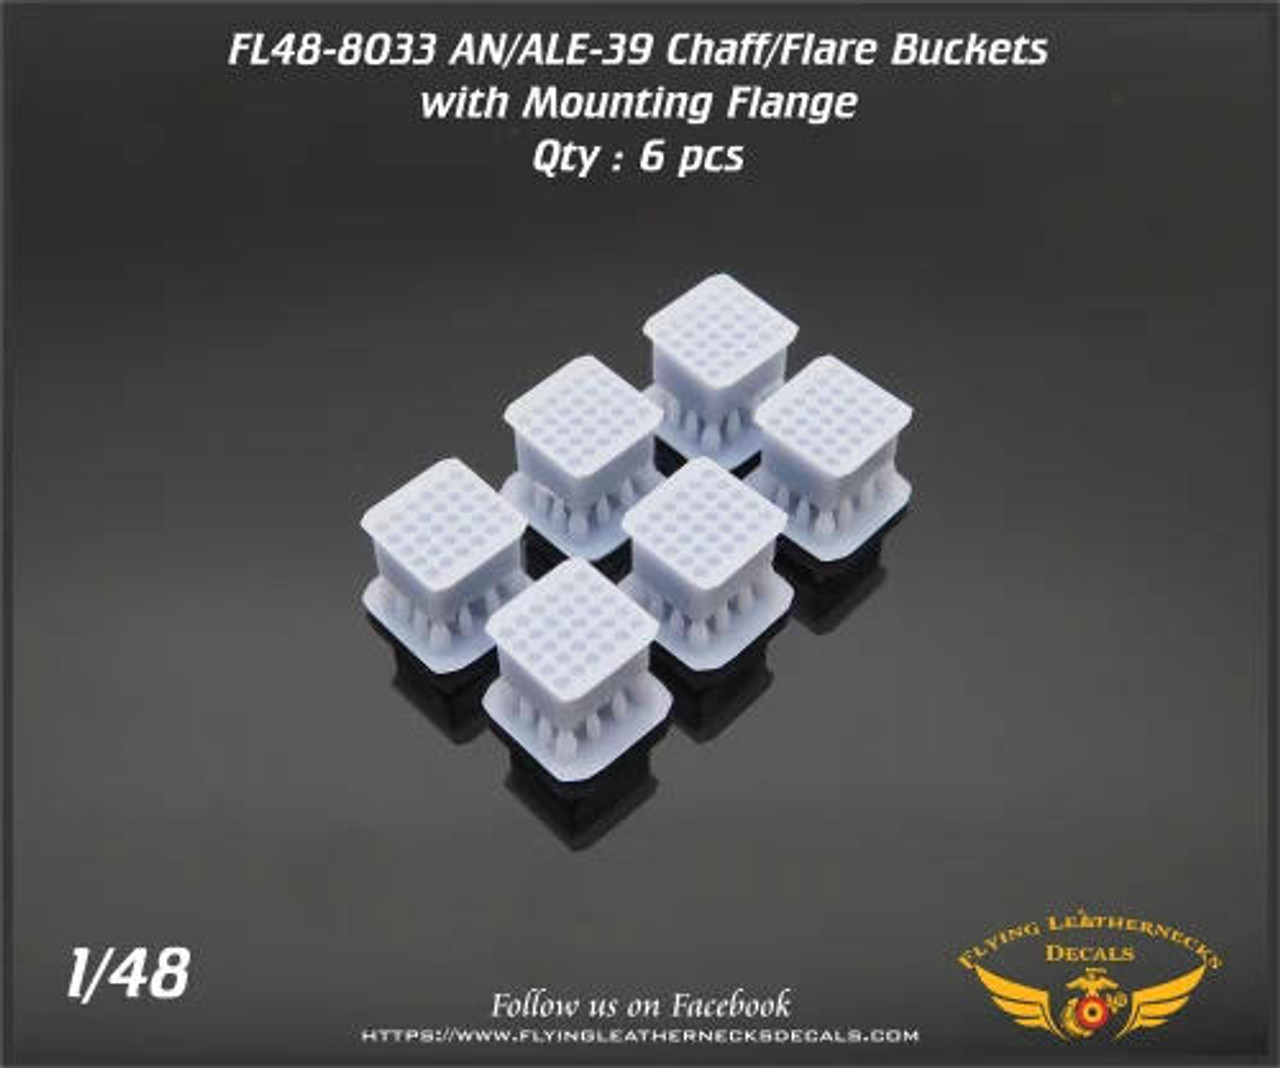 FLN-48-8033 1/48 Flying Leathernecks AN/ALE-39 Chaff/Flare buckets with flange MMD Squadron